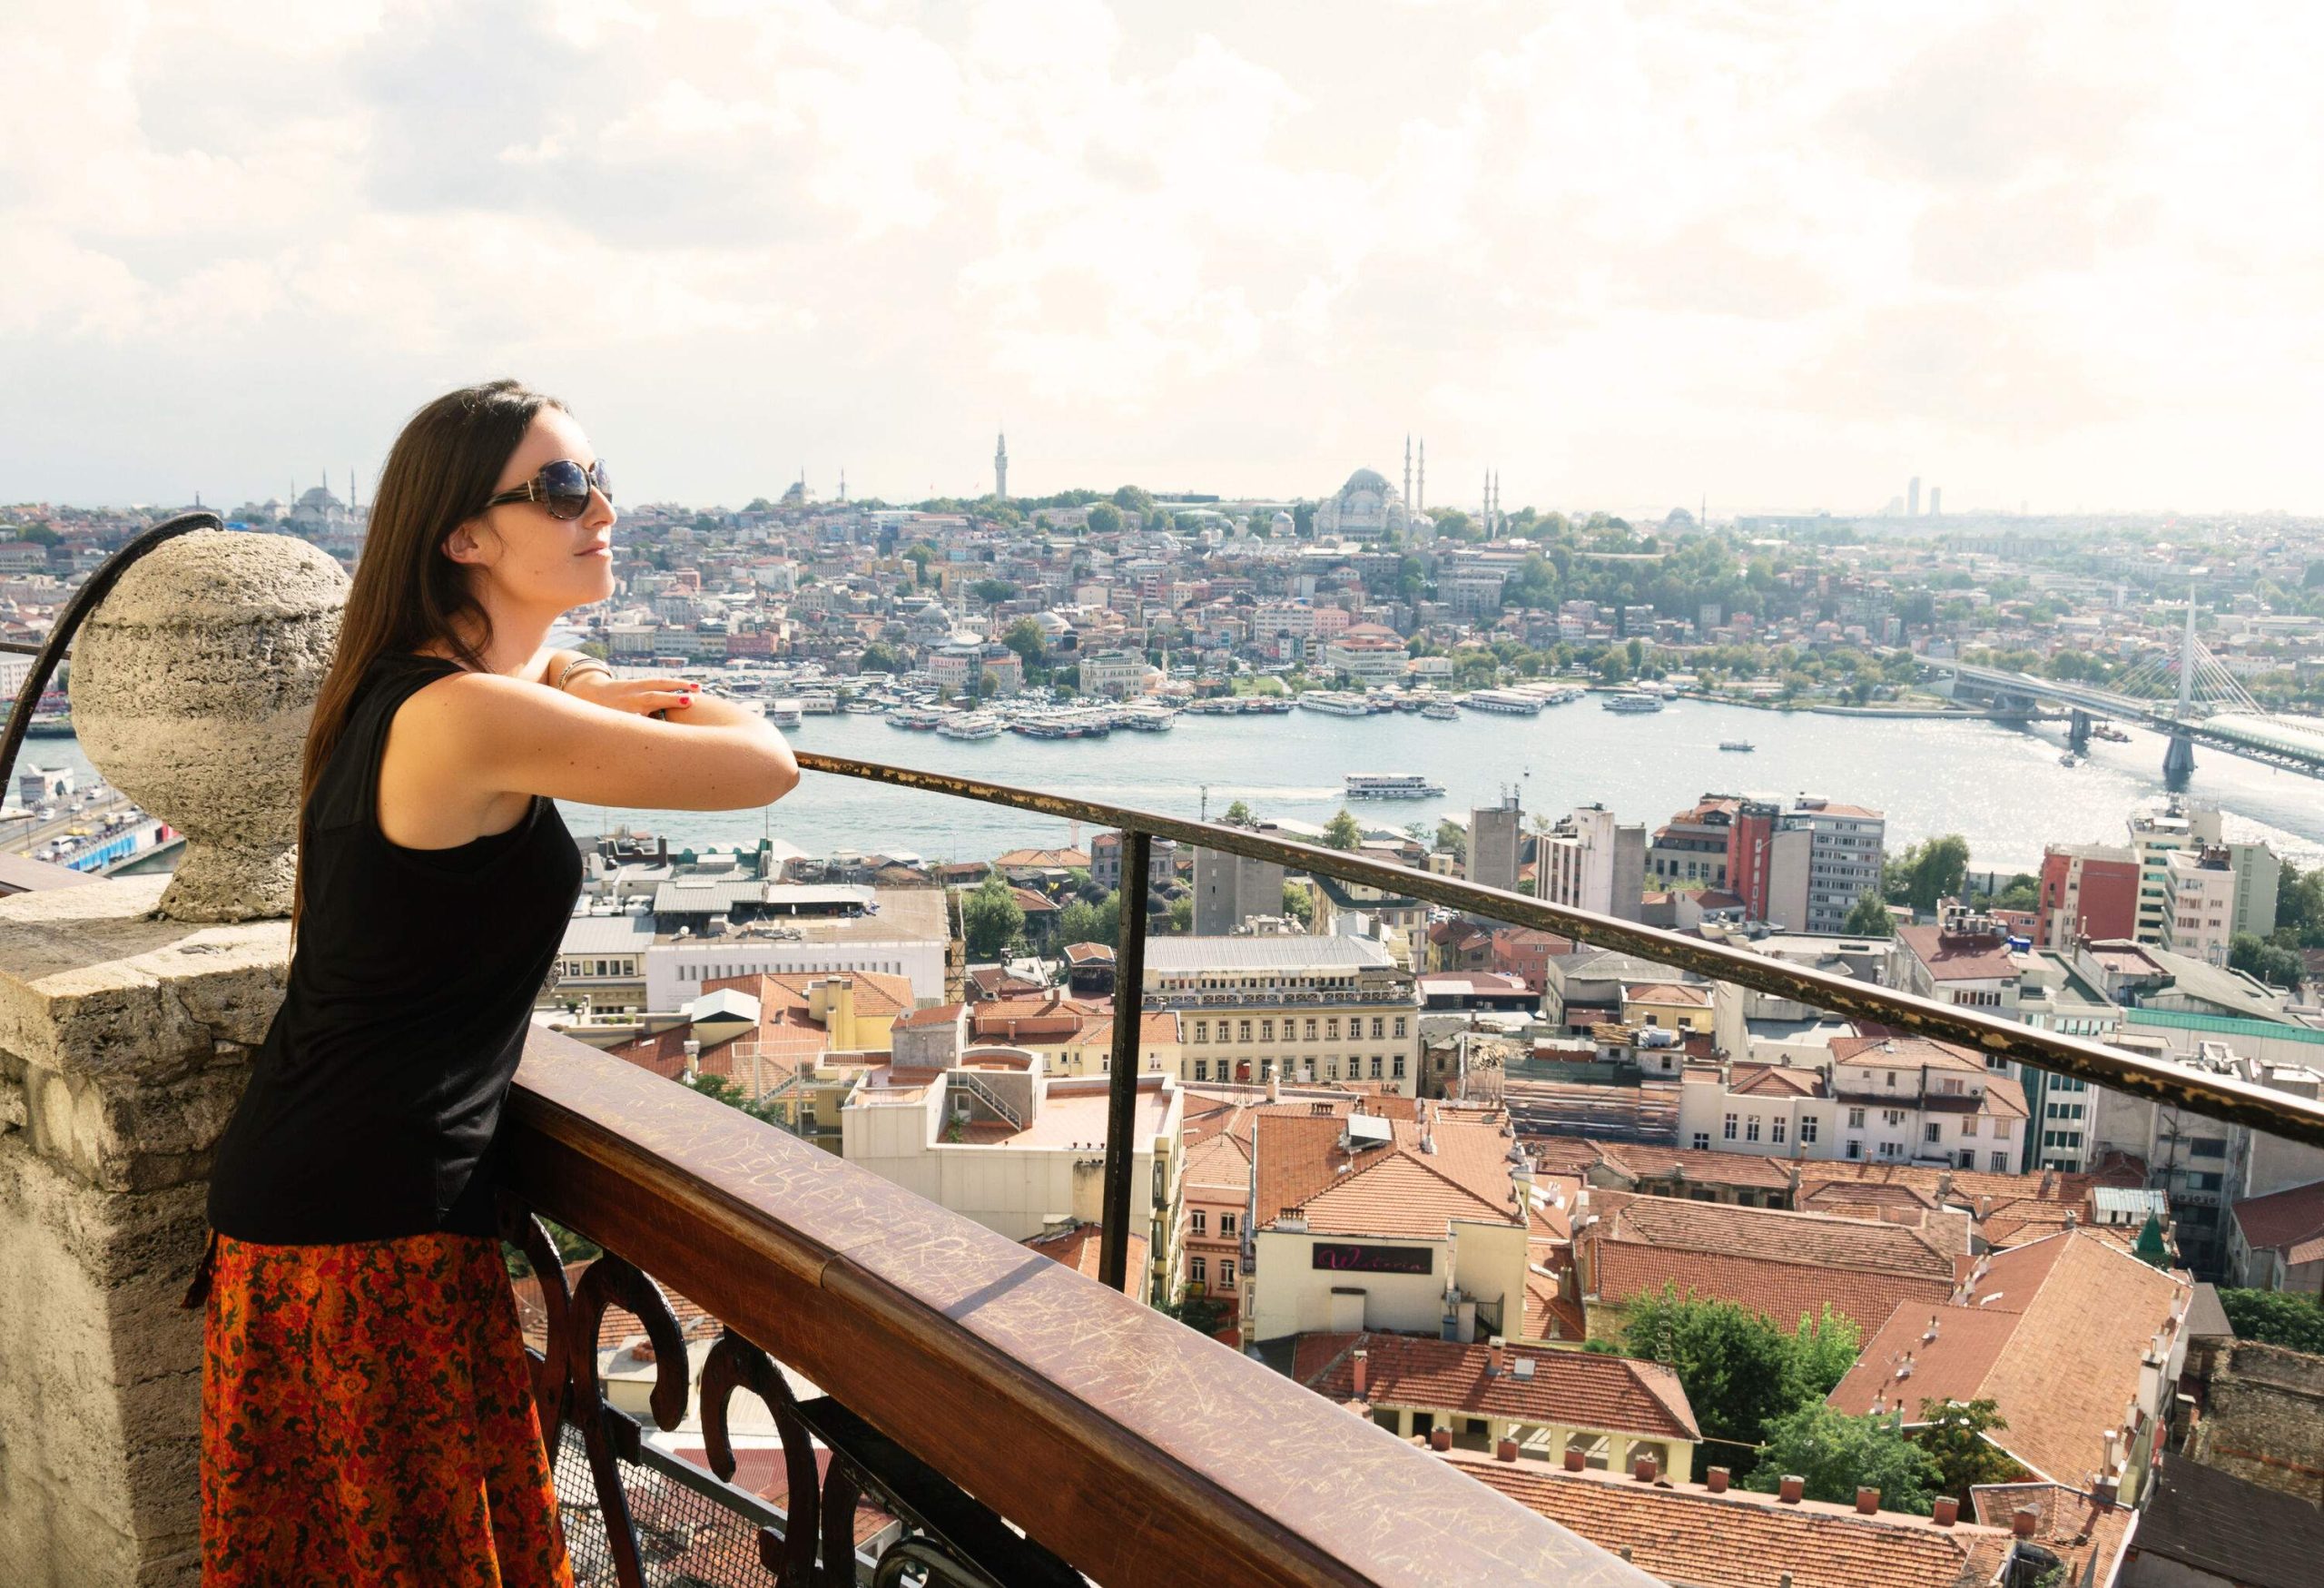 A woman leans out from a tower, taking in the breathtaking view of a city with an inlet running through its centre.